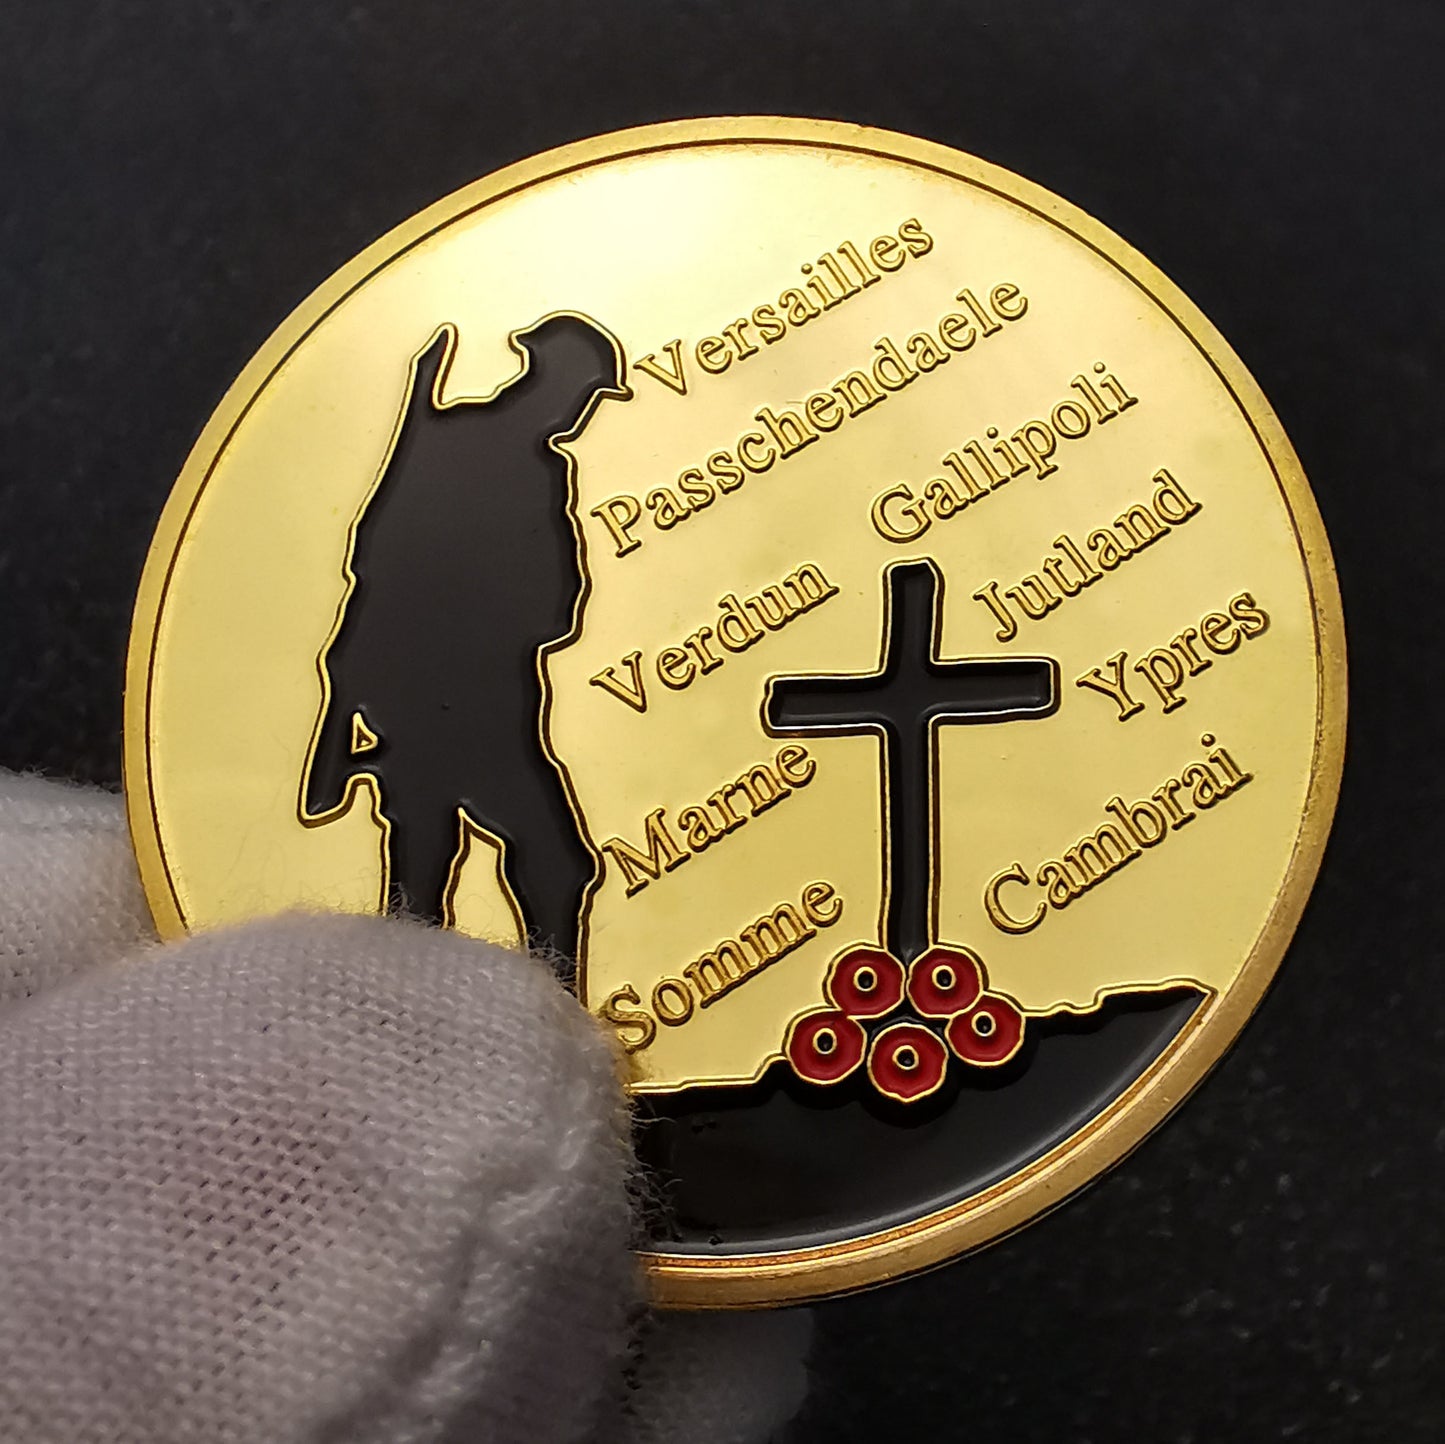 1914-1918 World War 1 Gold Plated Coin The Great War 100th Anniversary Commemorative WW1 Challenge Coin